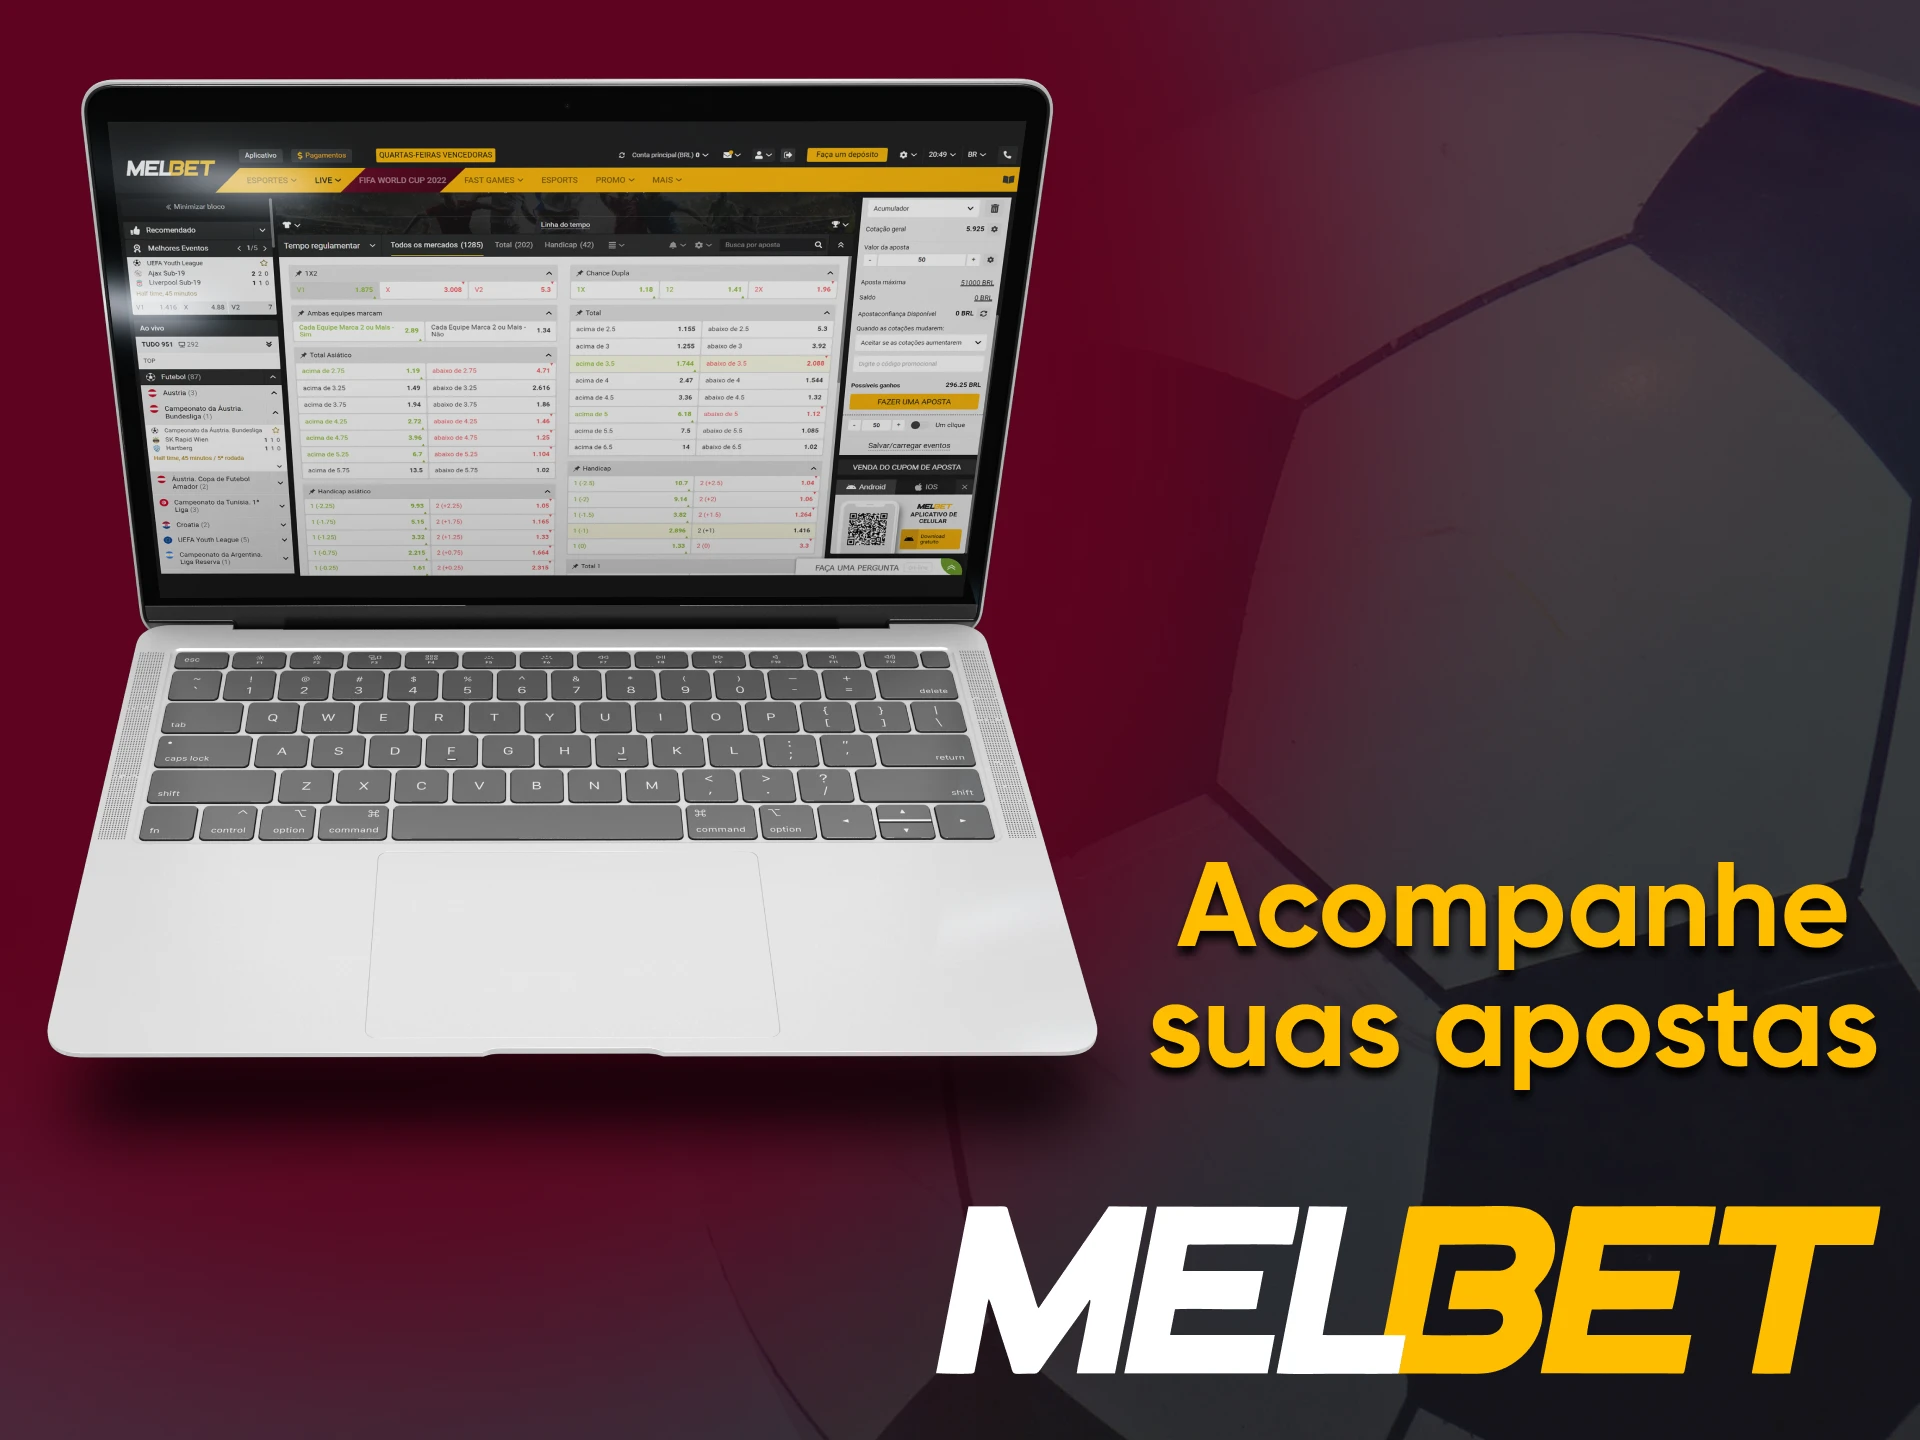 You can track your bets on Melbet.